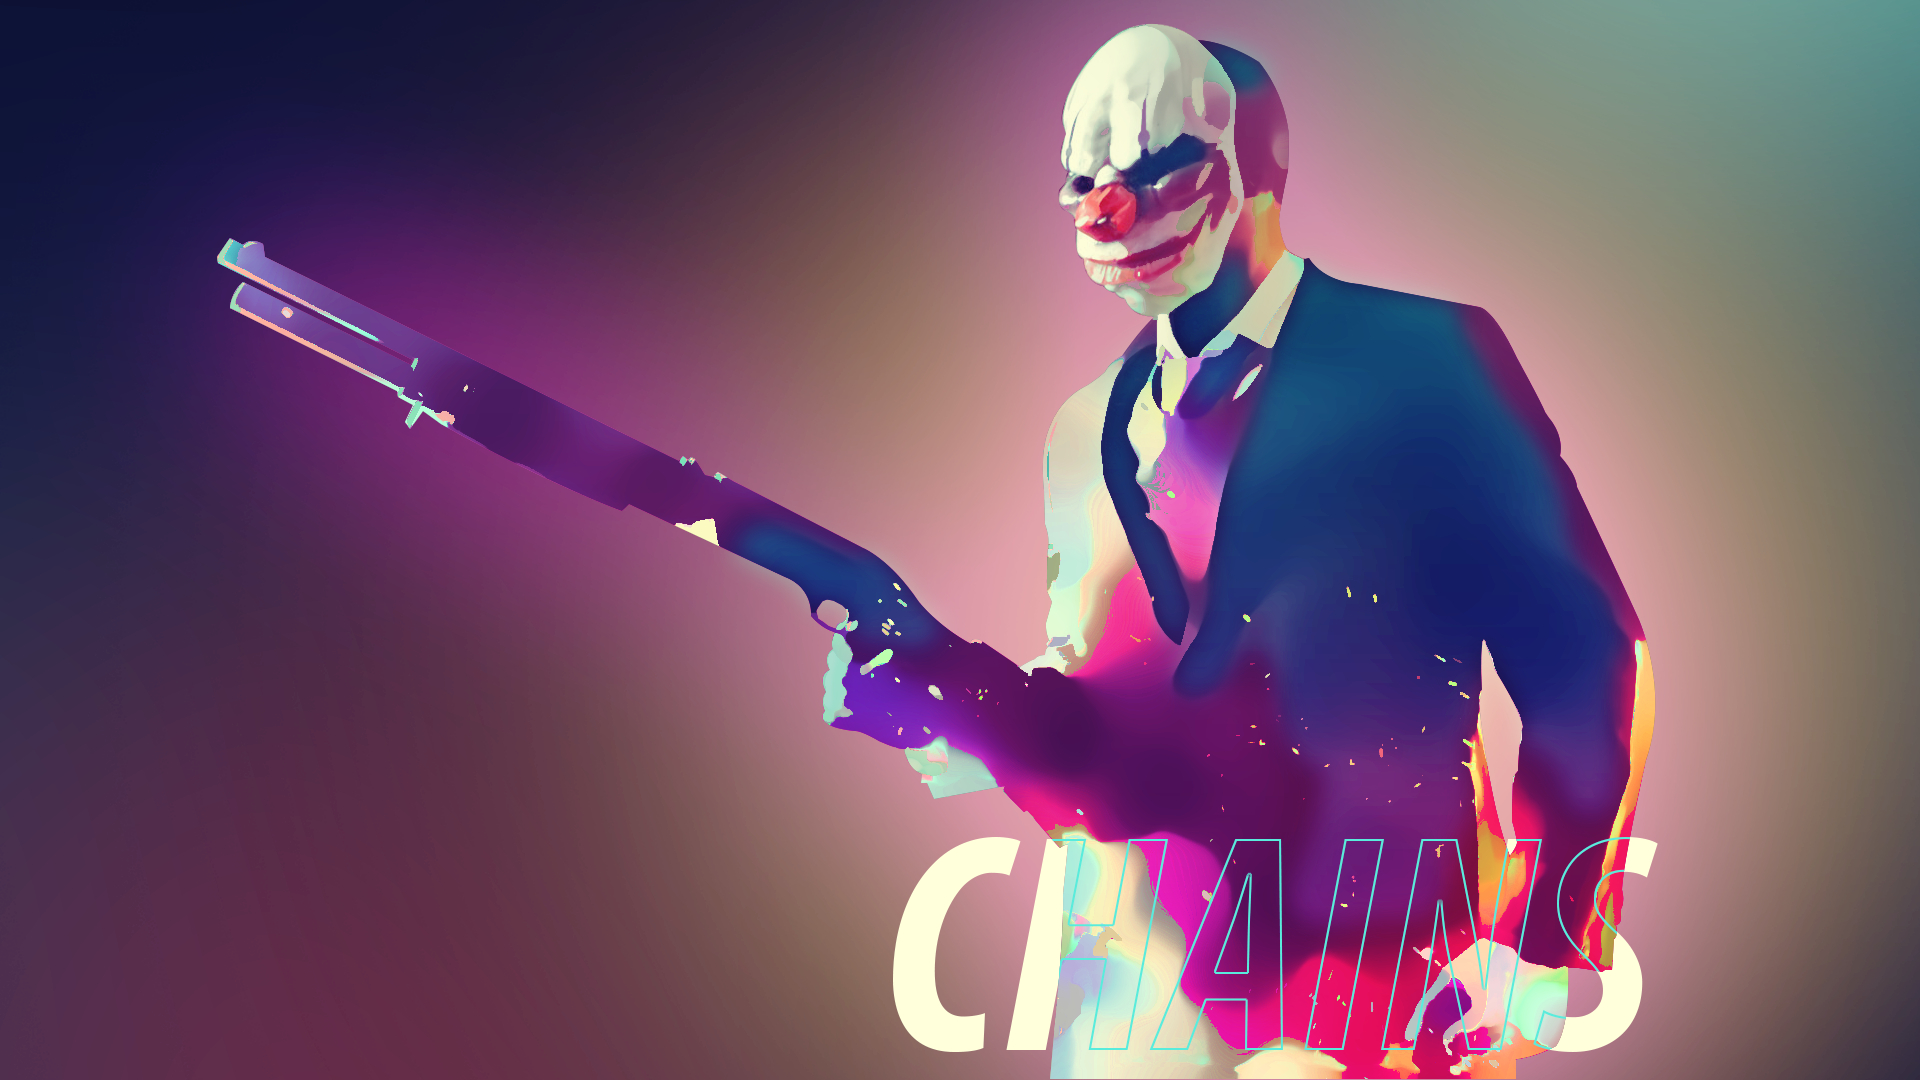 1920x1080 I made some Payday 2 Wallpapers inspired by Cyberworm360's Hotline Miami Posters : r/paydaytheheist